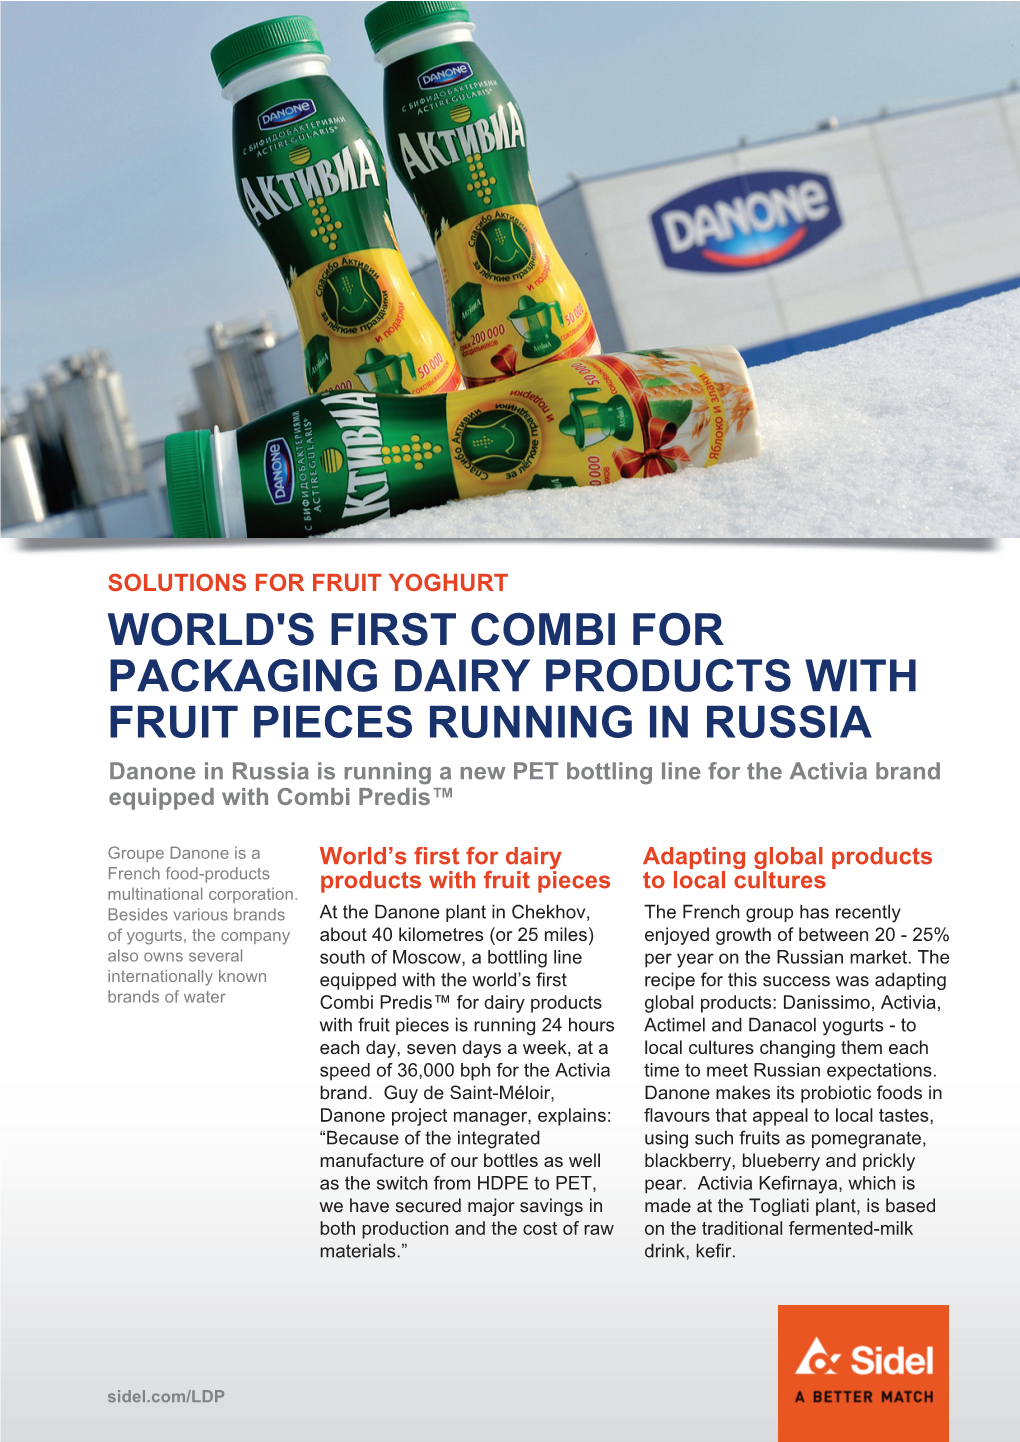 World's First Combi for Packaging Dairy Products with Fruit Pieces Running In